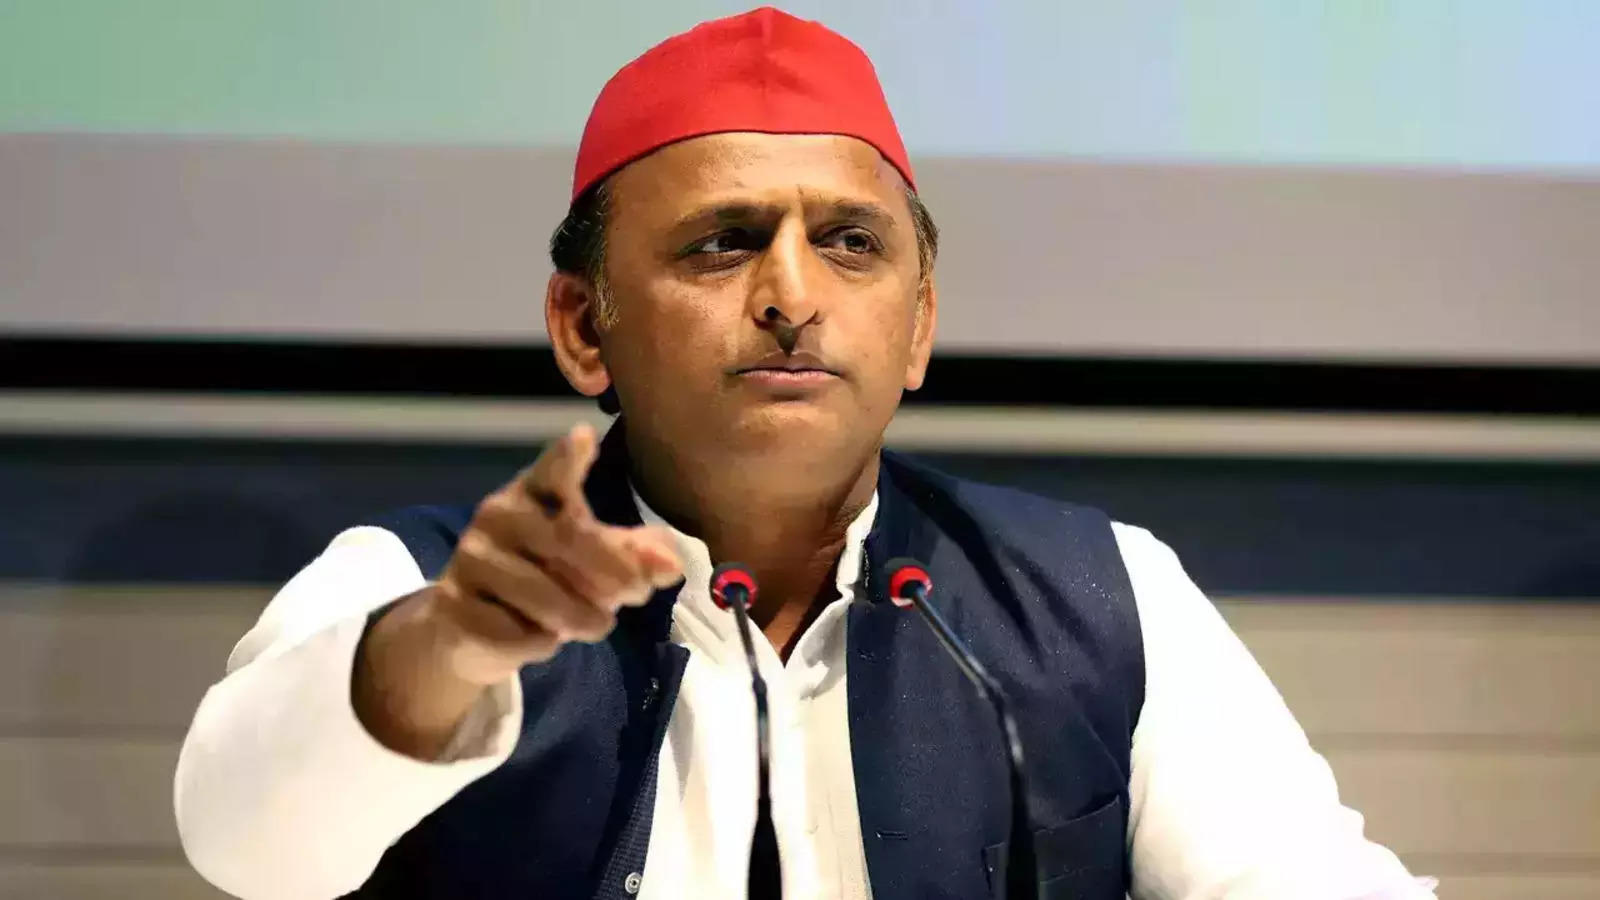 Akhilesh Yadav’s Perspective on the Prevalence of Paper Leaks in Parliament